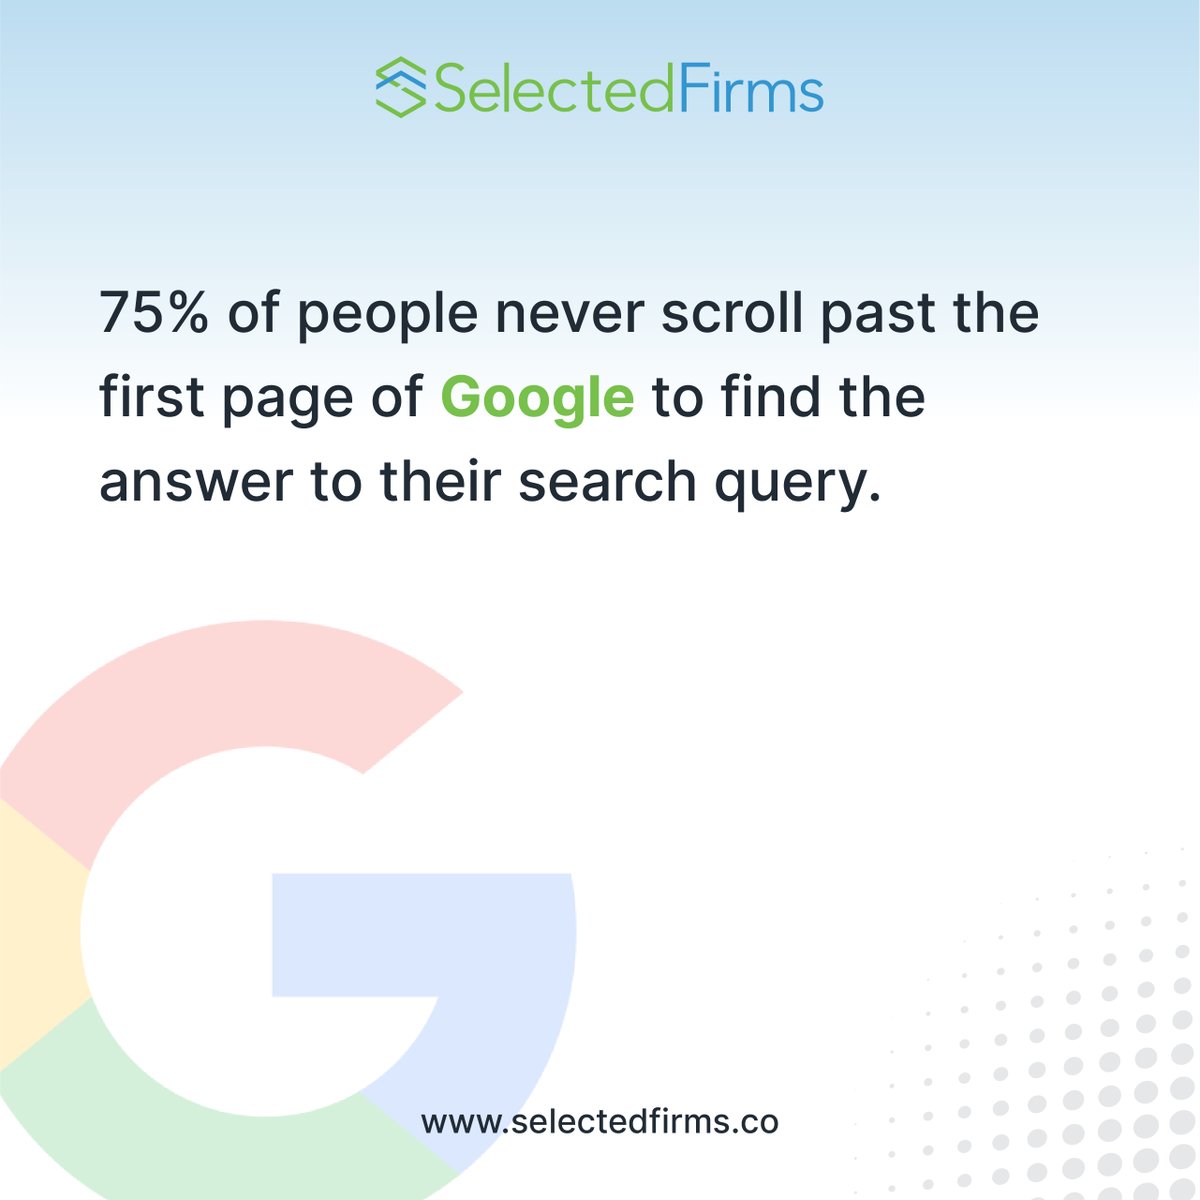 2.
👉 Check out 👀 some interesting facts to update your knowledge database on digital marketing

#selectedfirms #didyouknow #didyouknowfacts #digitalamarketing #digitalmarketingtips #digitalmarketingfacts #digitalmarketingusa #digitalmarketingagency